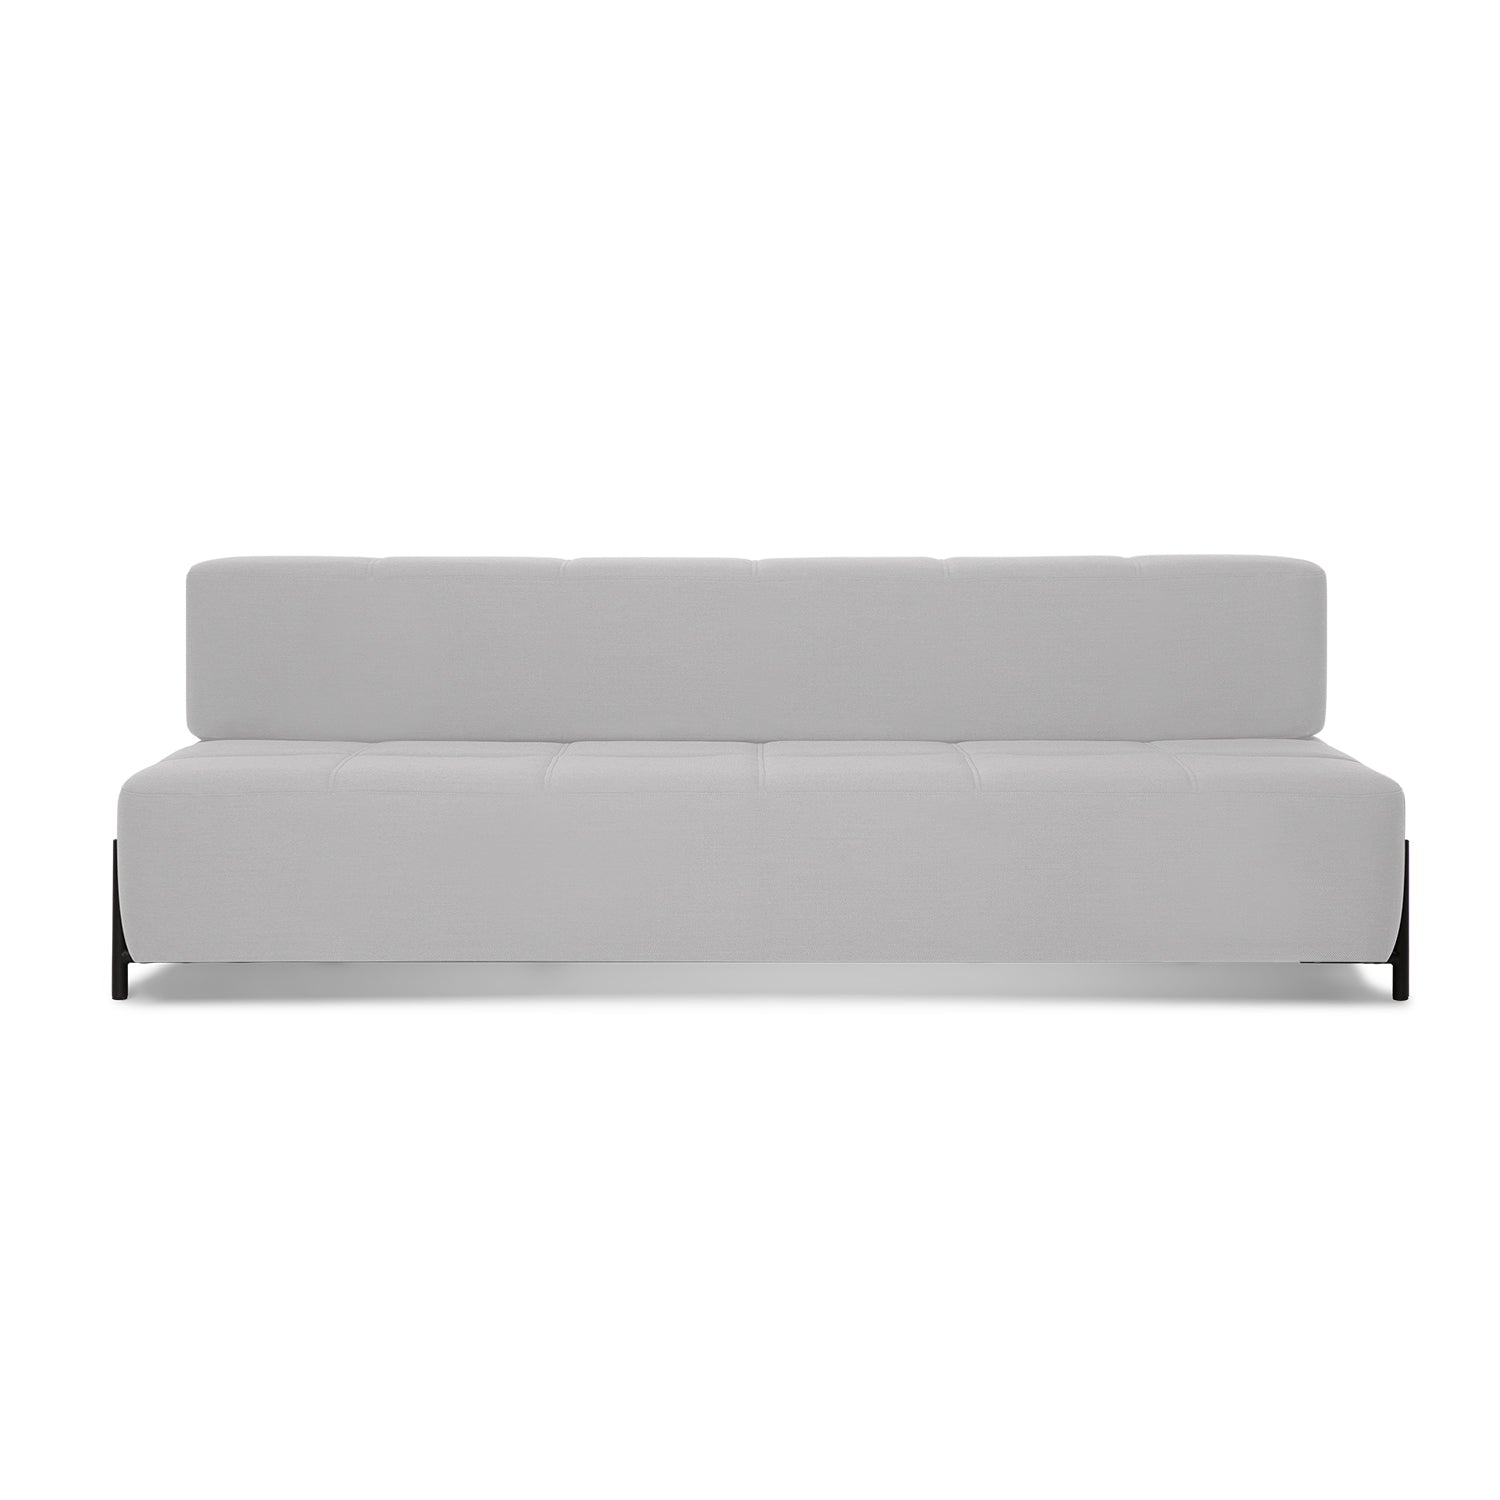 Northern Daybe Sofabed without Armrest in Warm Light Grey